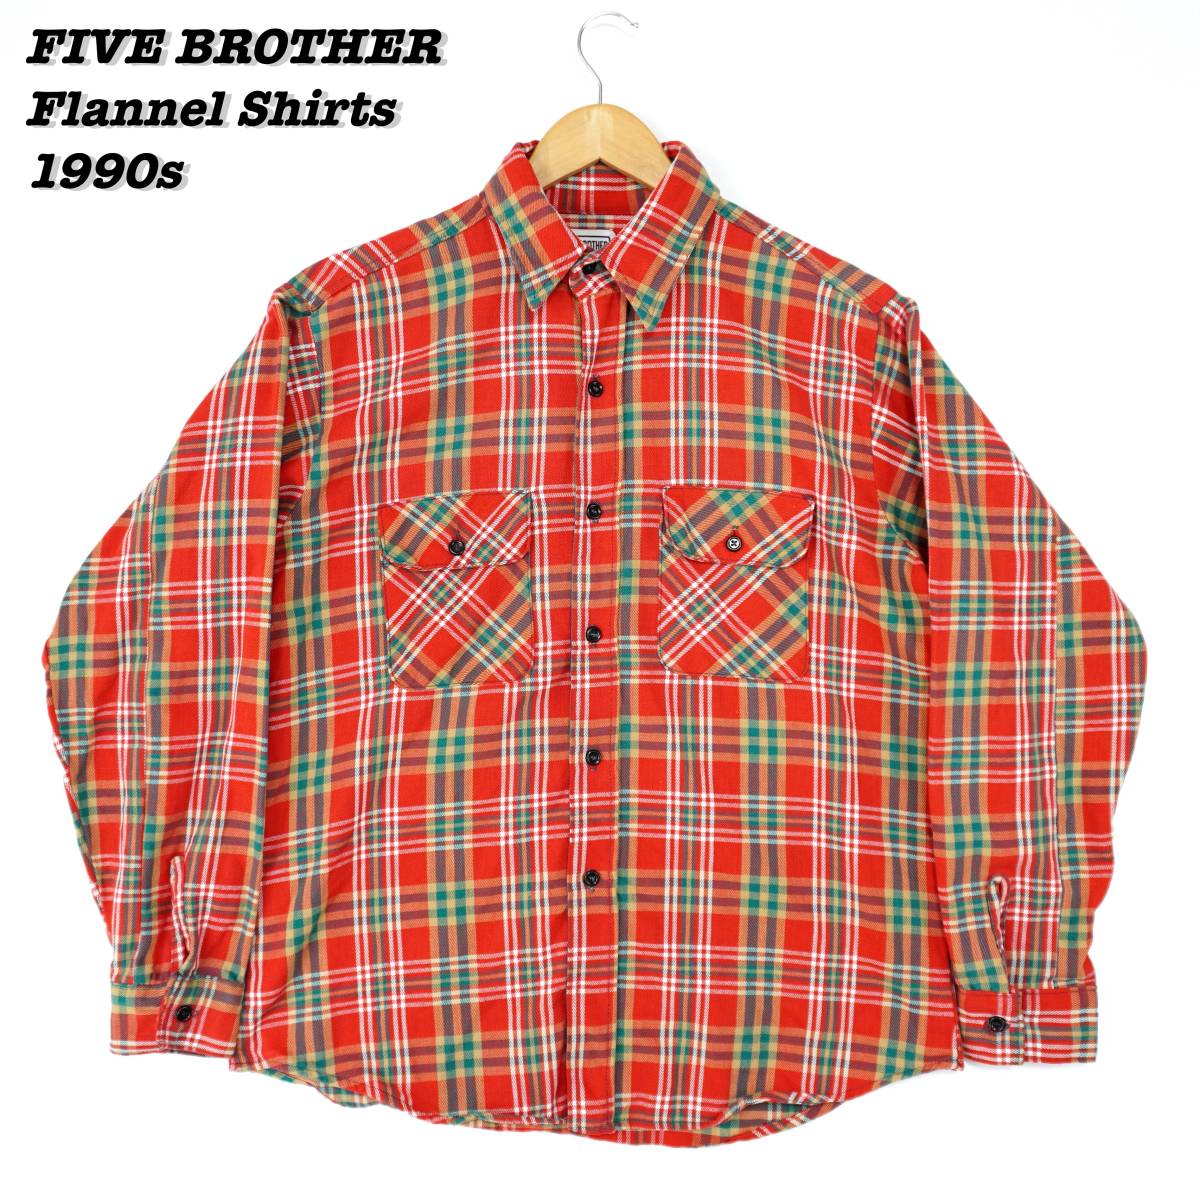 FIVE BROTHER Flannel Shirts L SHIRT23175 1990s Made in USA ファイブブラザー フランネルシャツ 1990年代 アメリカ製